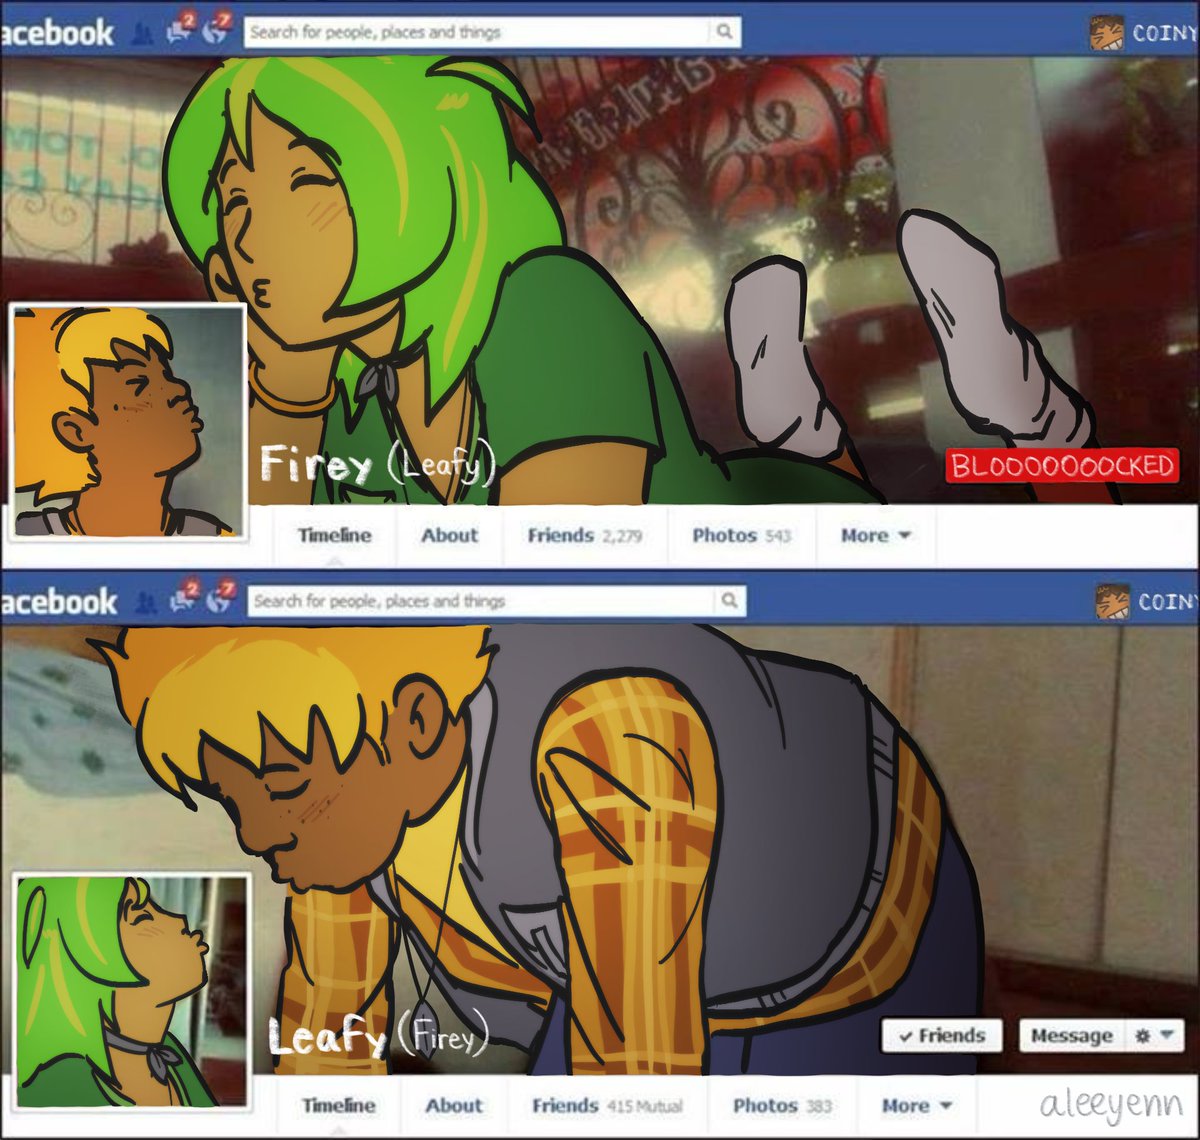 arghhh i have no idea what the facebook layout is like but fireafy.. Eeyuck! #bfdi